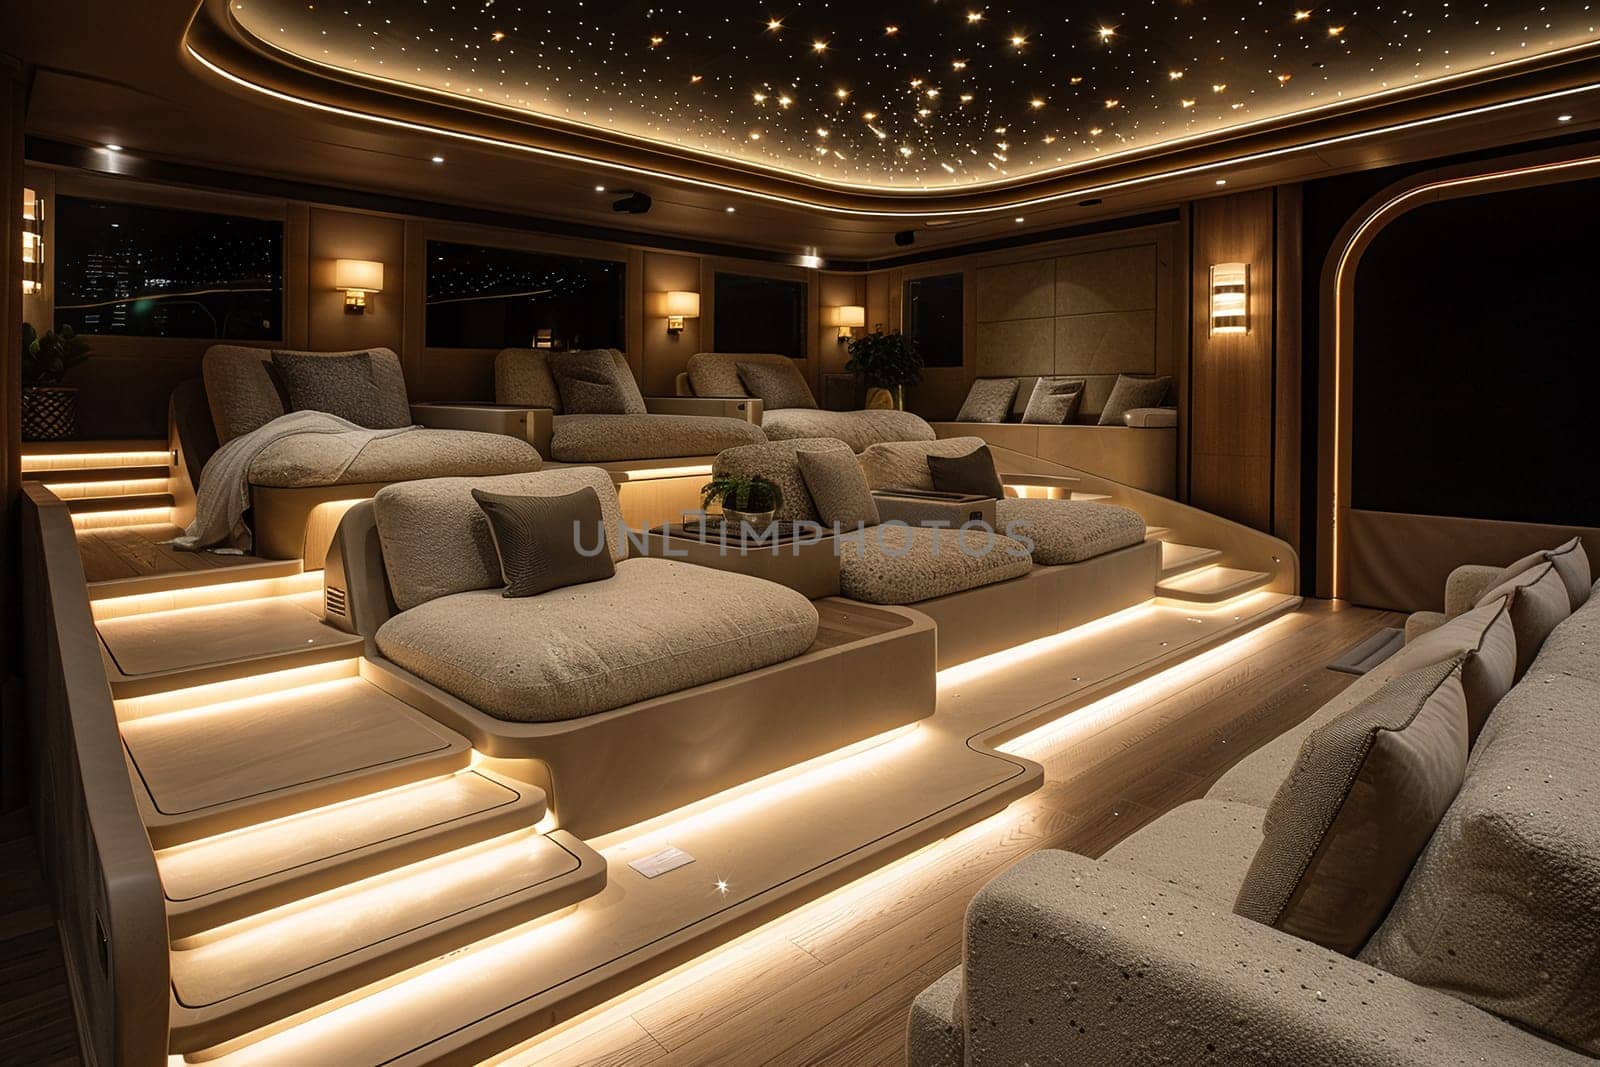 Luxurious home theater with plush seating and state-of-the-art sound system